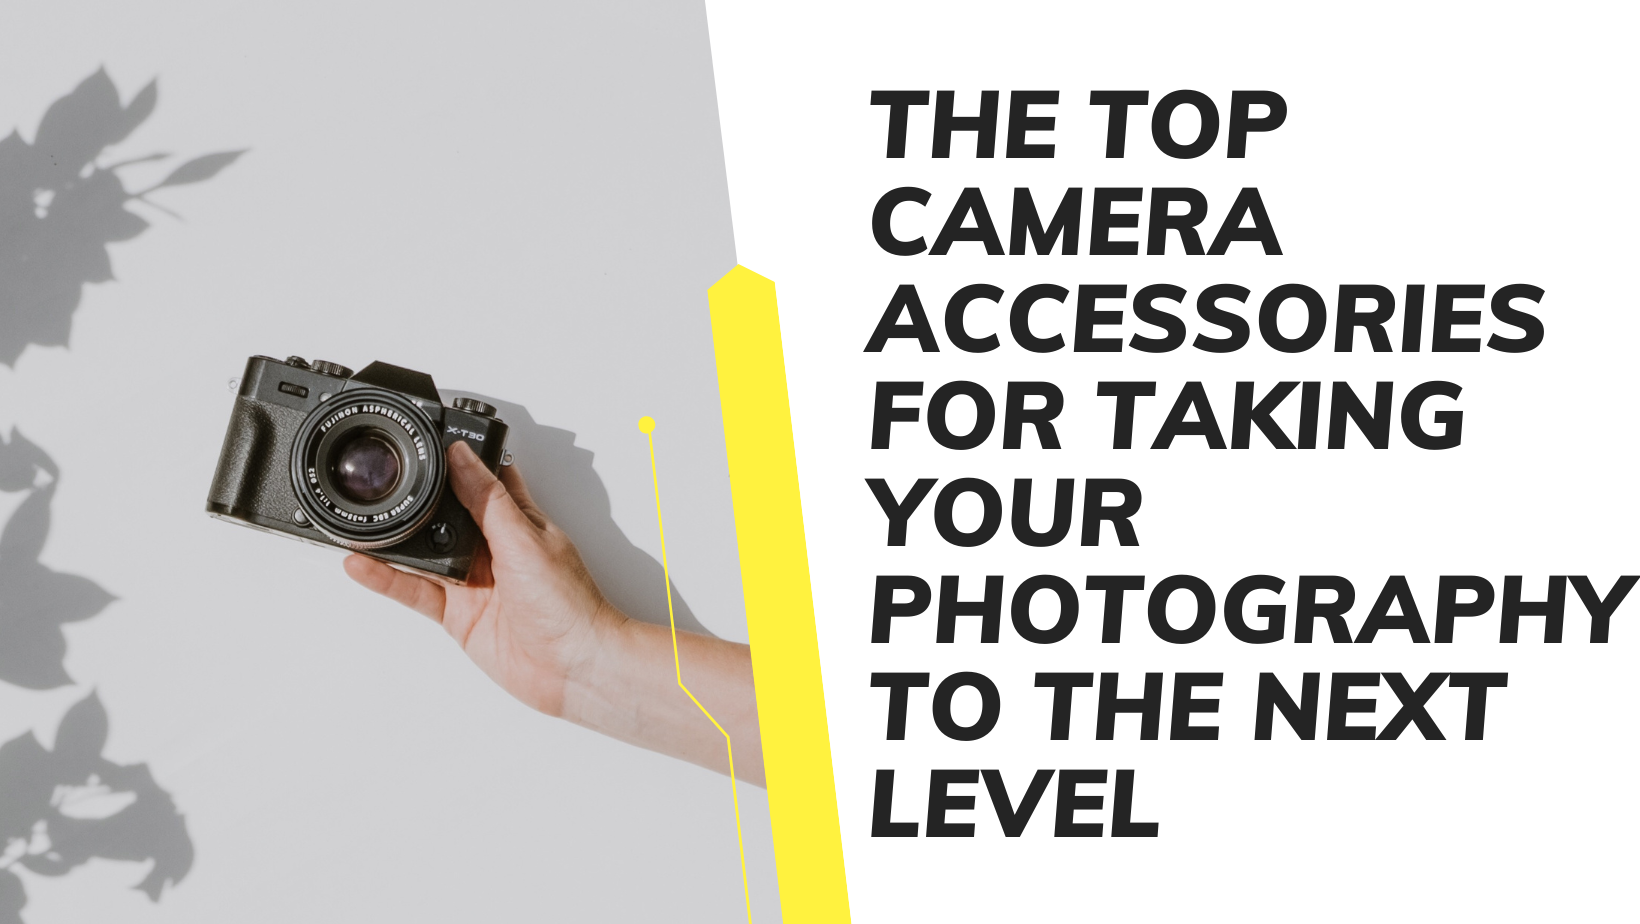 The Top Camera Accessories for Taking Your Photography to the Next Level